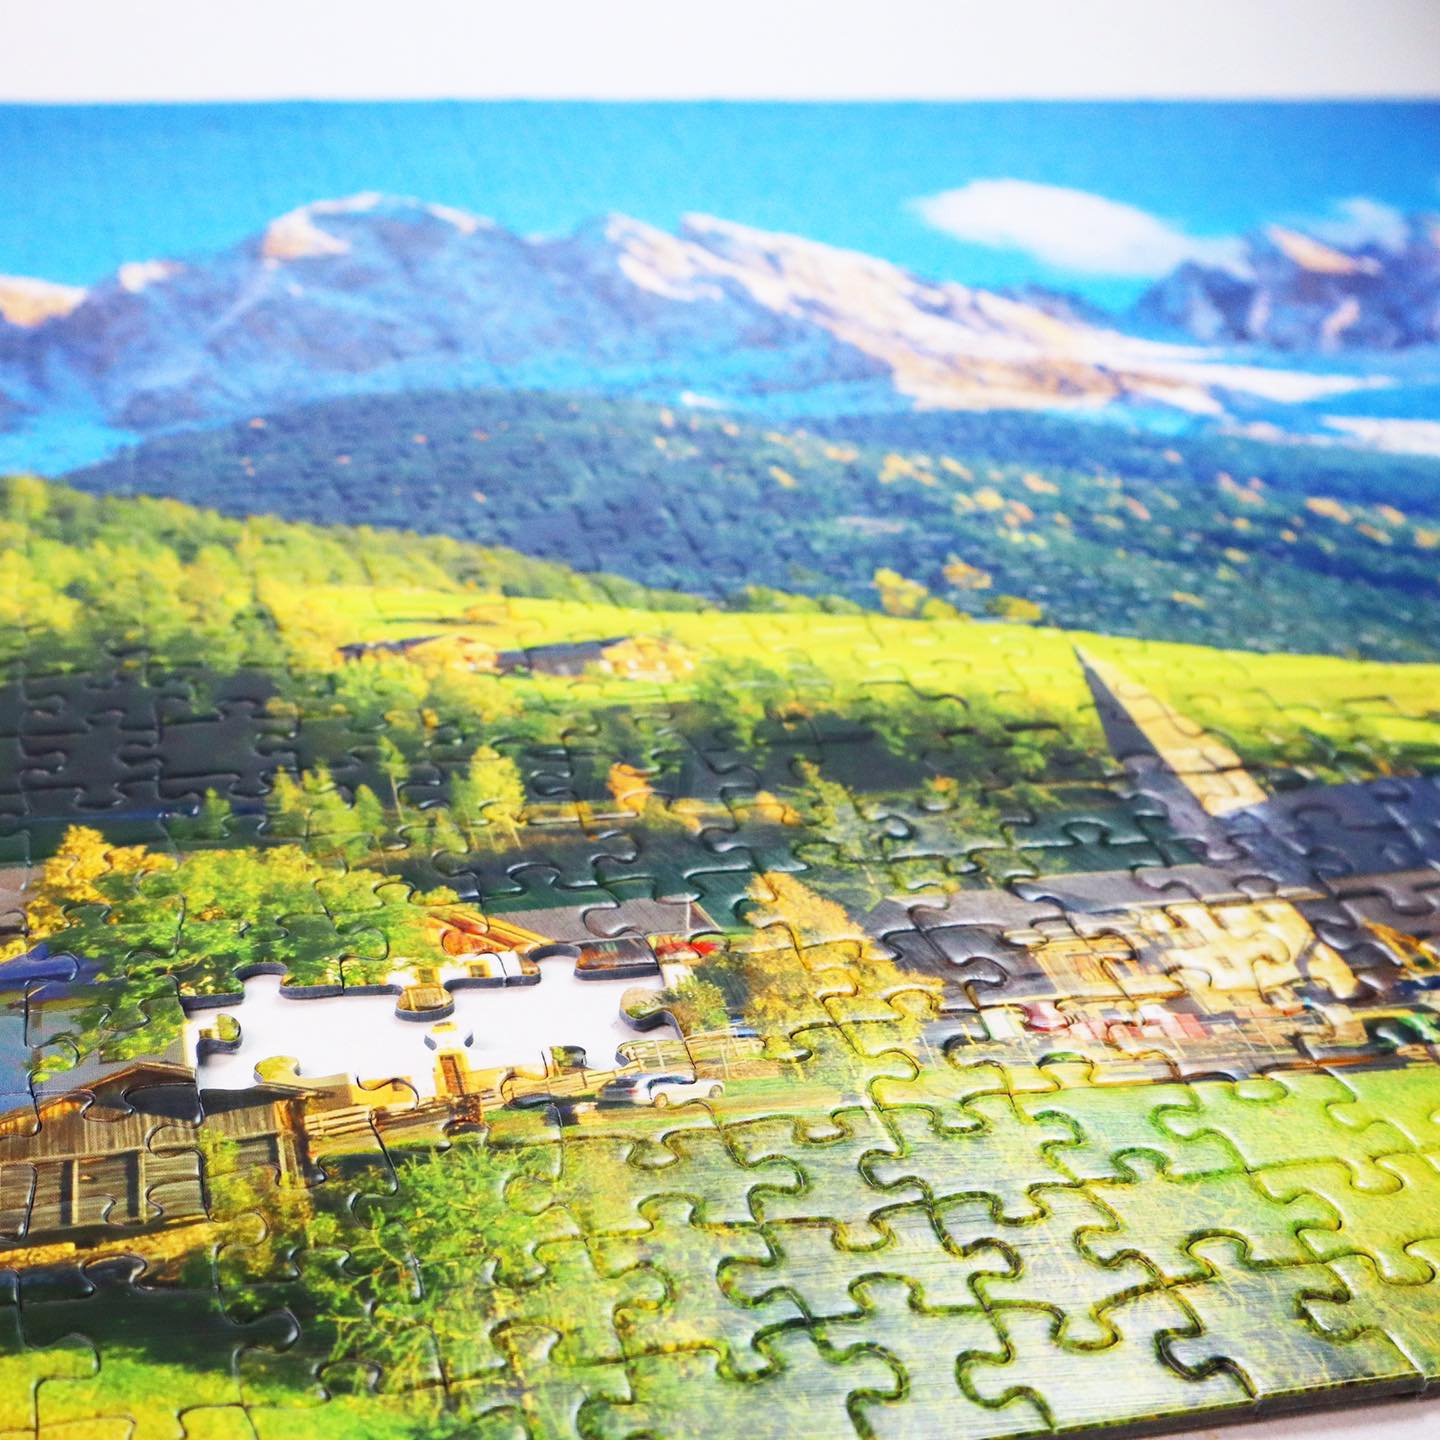 Calypto Jigsaw Puzzle 1000 Piece - Dolomite Mountains in Italy